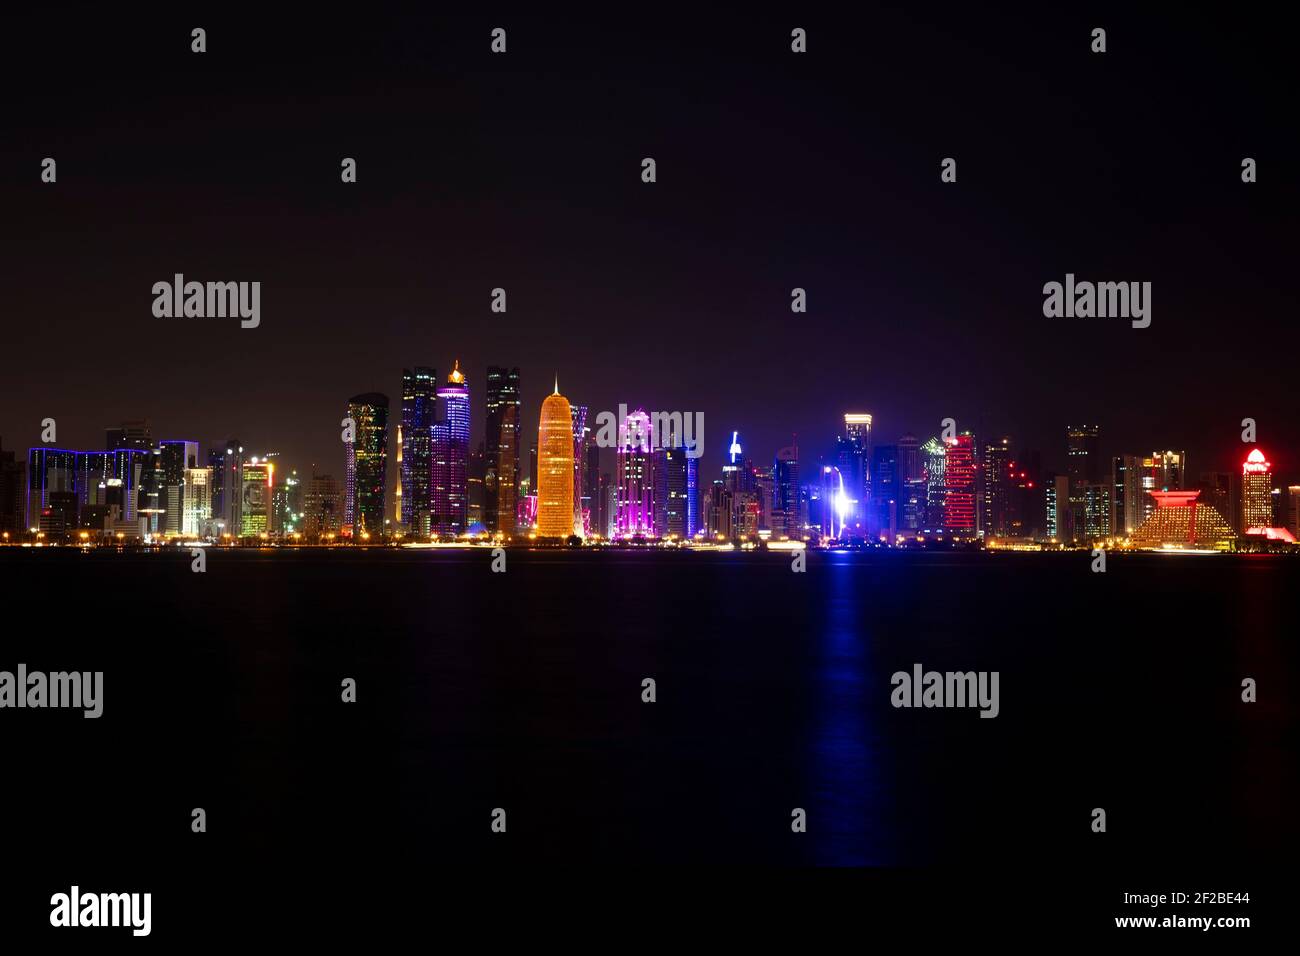 DOHA, QUATAR - JANUARY 21, 2019: View at Doha, Quatar at night. Doha is the capital and most populous city of the State of Qatar Stock Photo